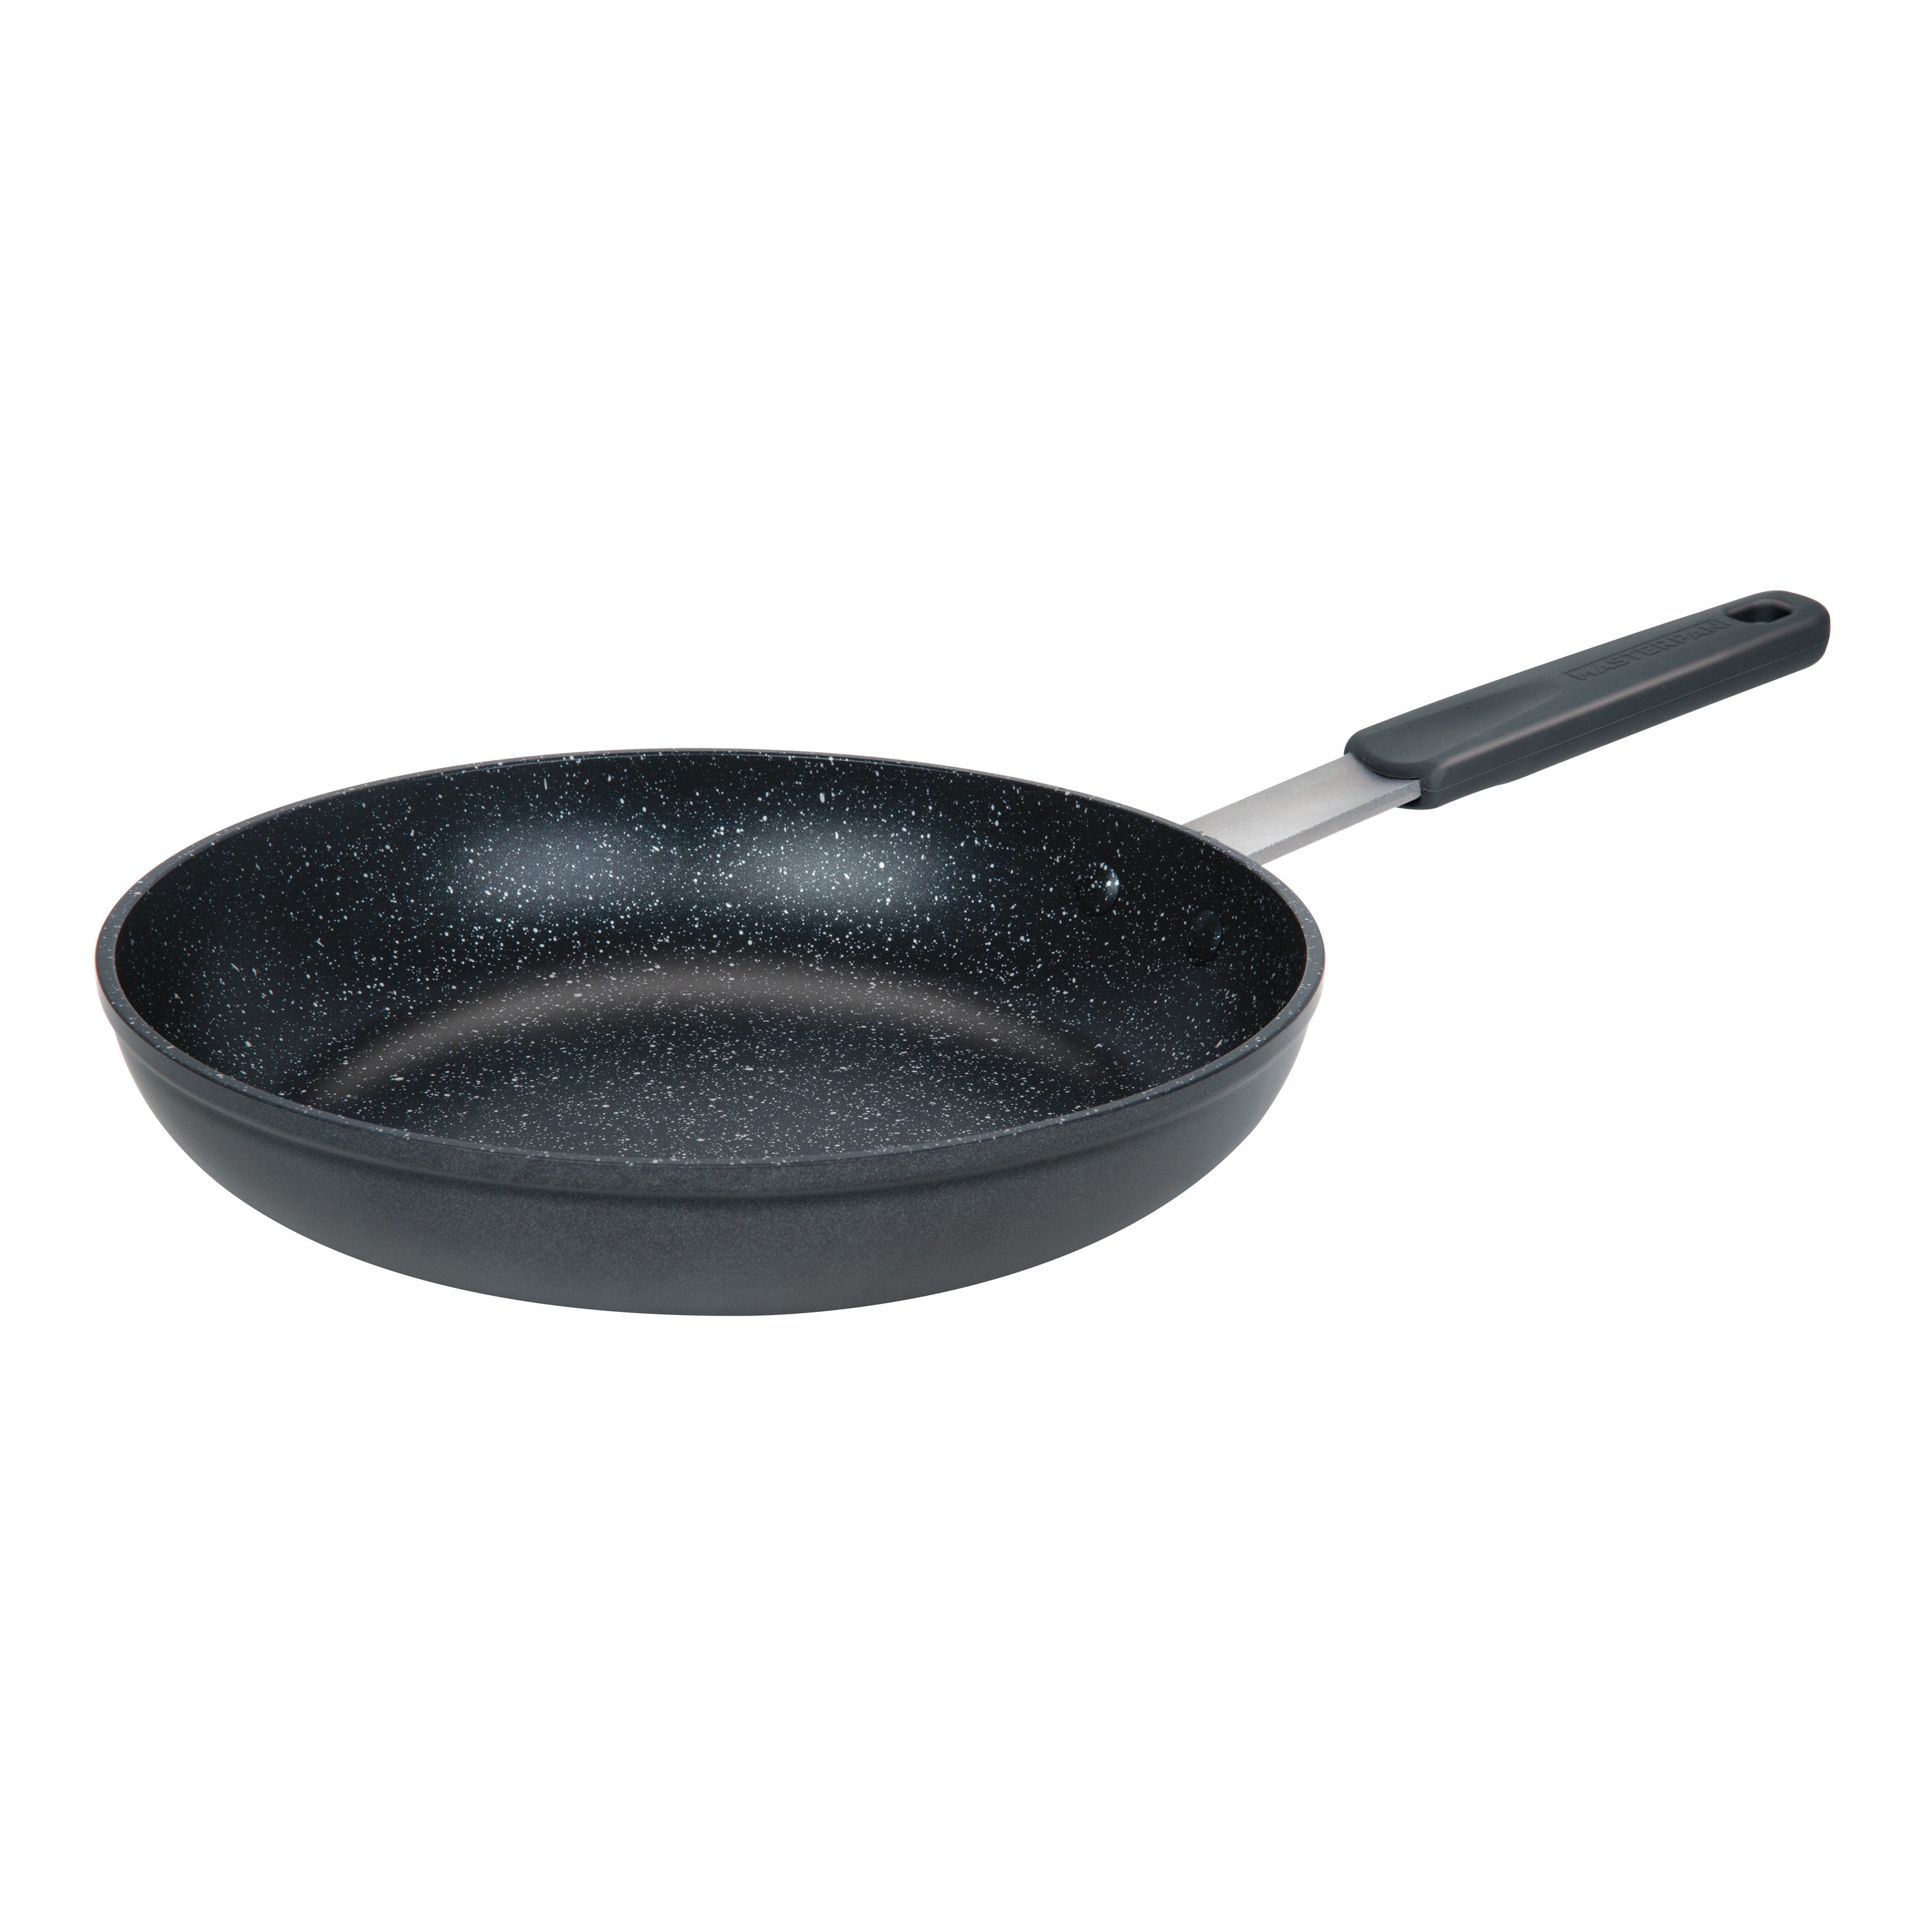 MASTERPAN Nonstick Frypan & Skillet with Chef's Handle, 11